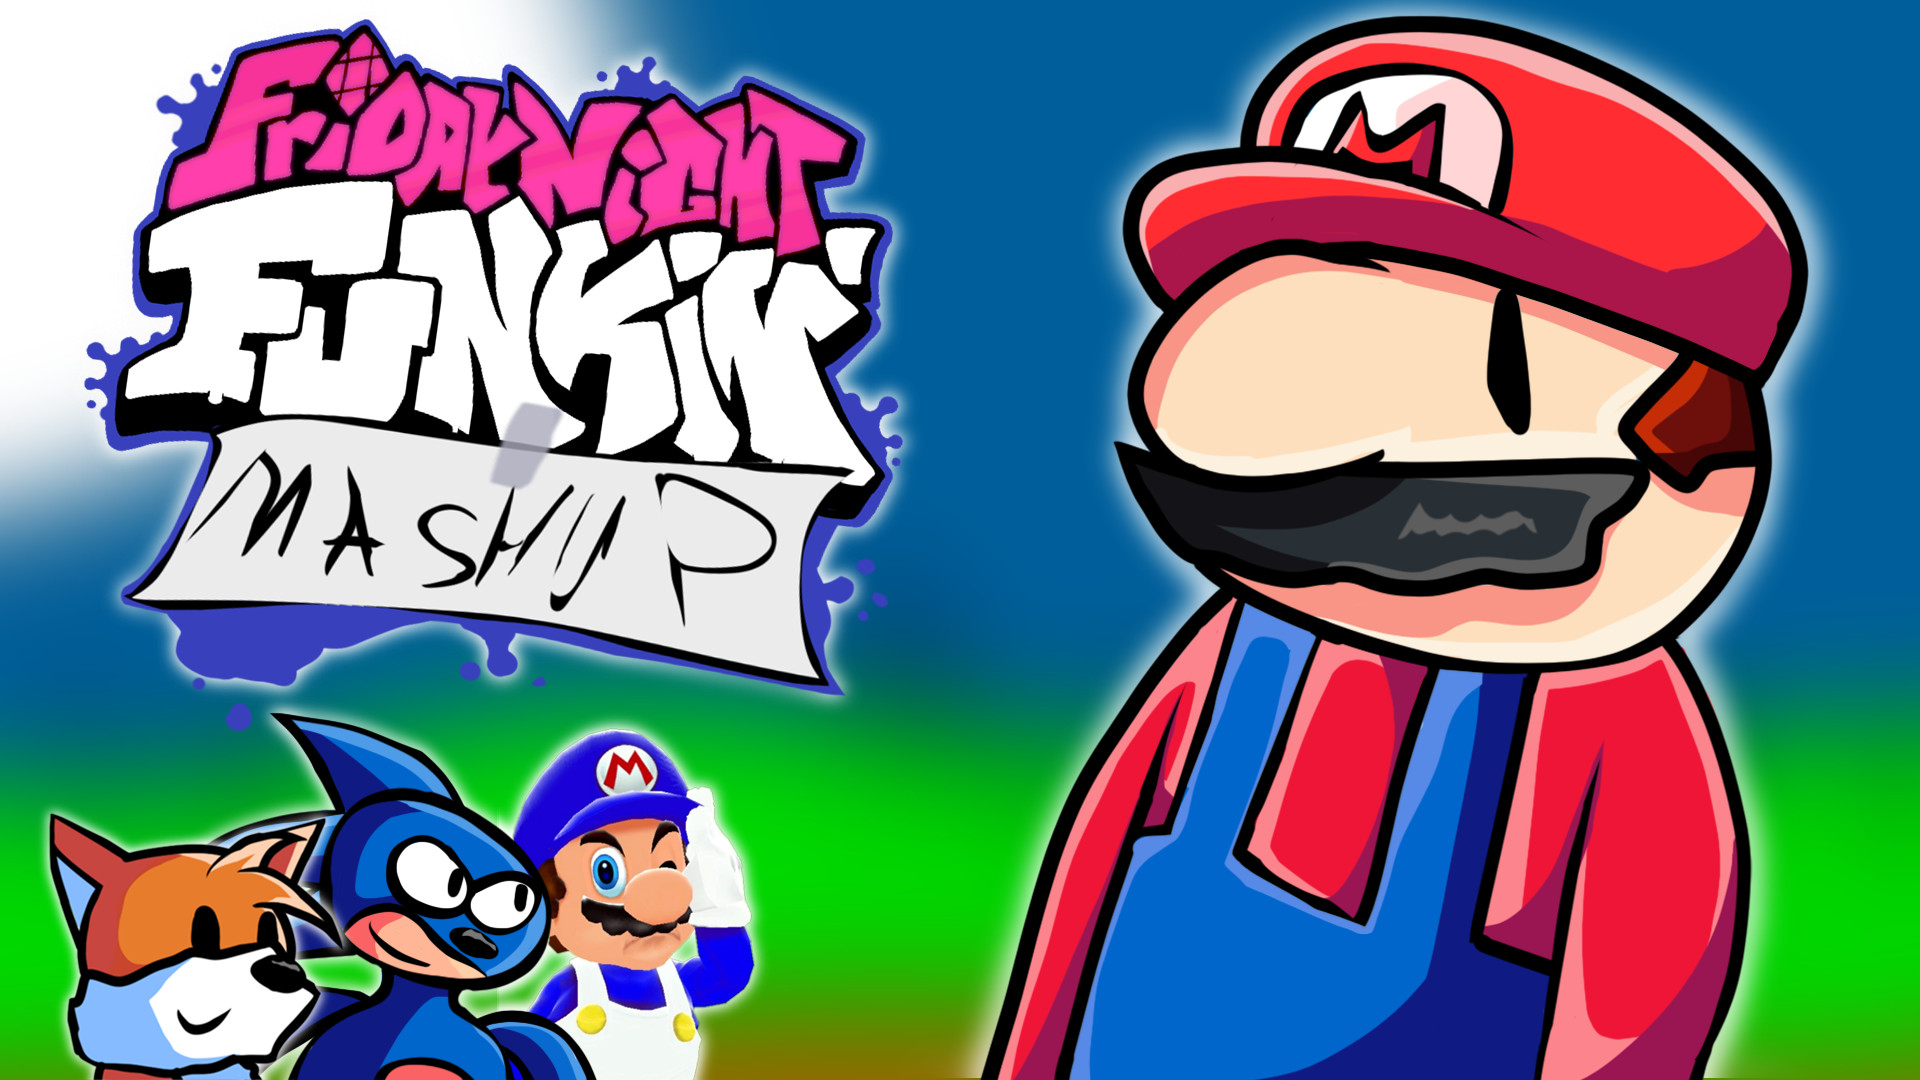 vs cat mario game mod : Friday night funkin android apk link